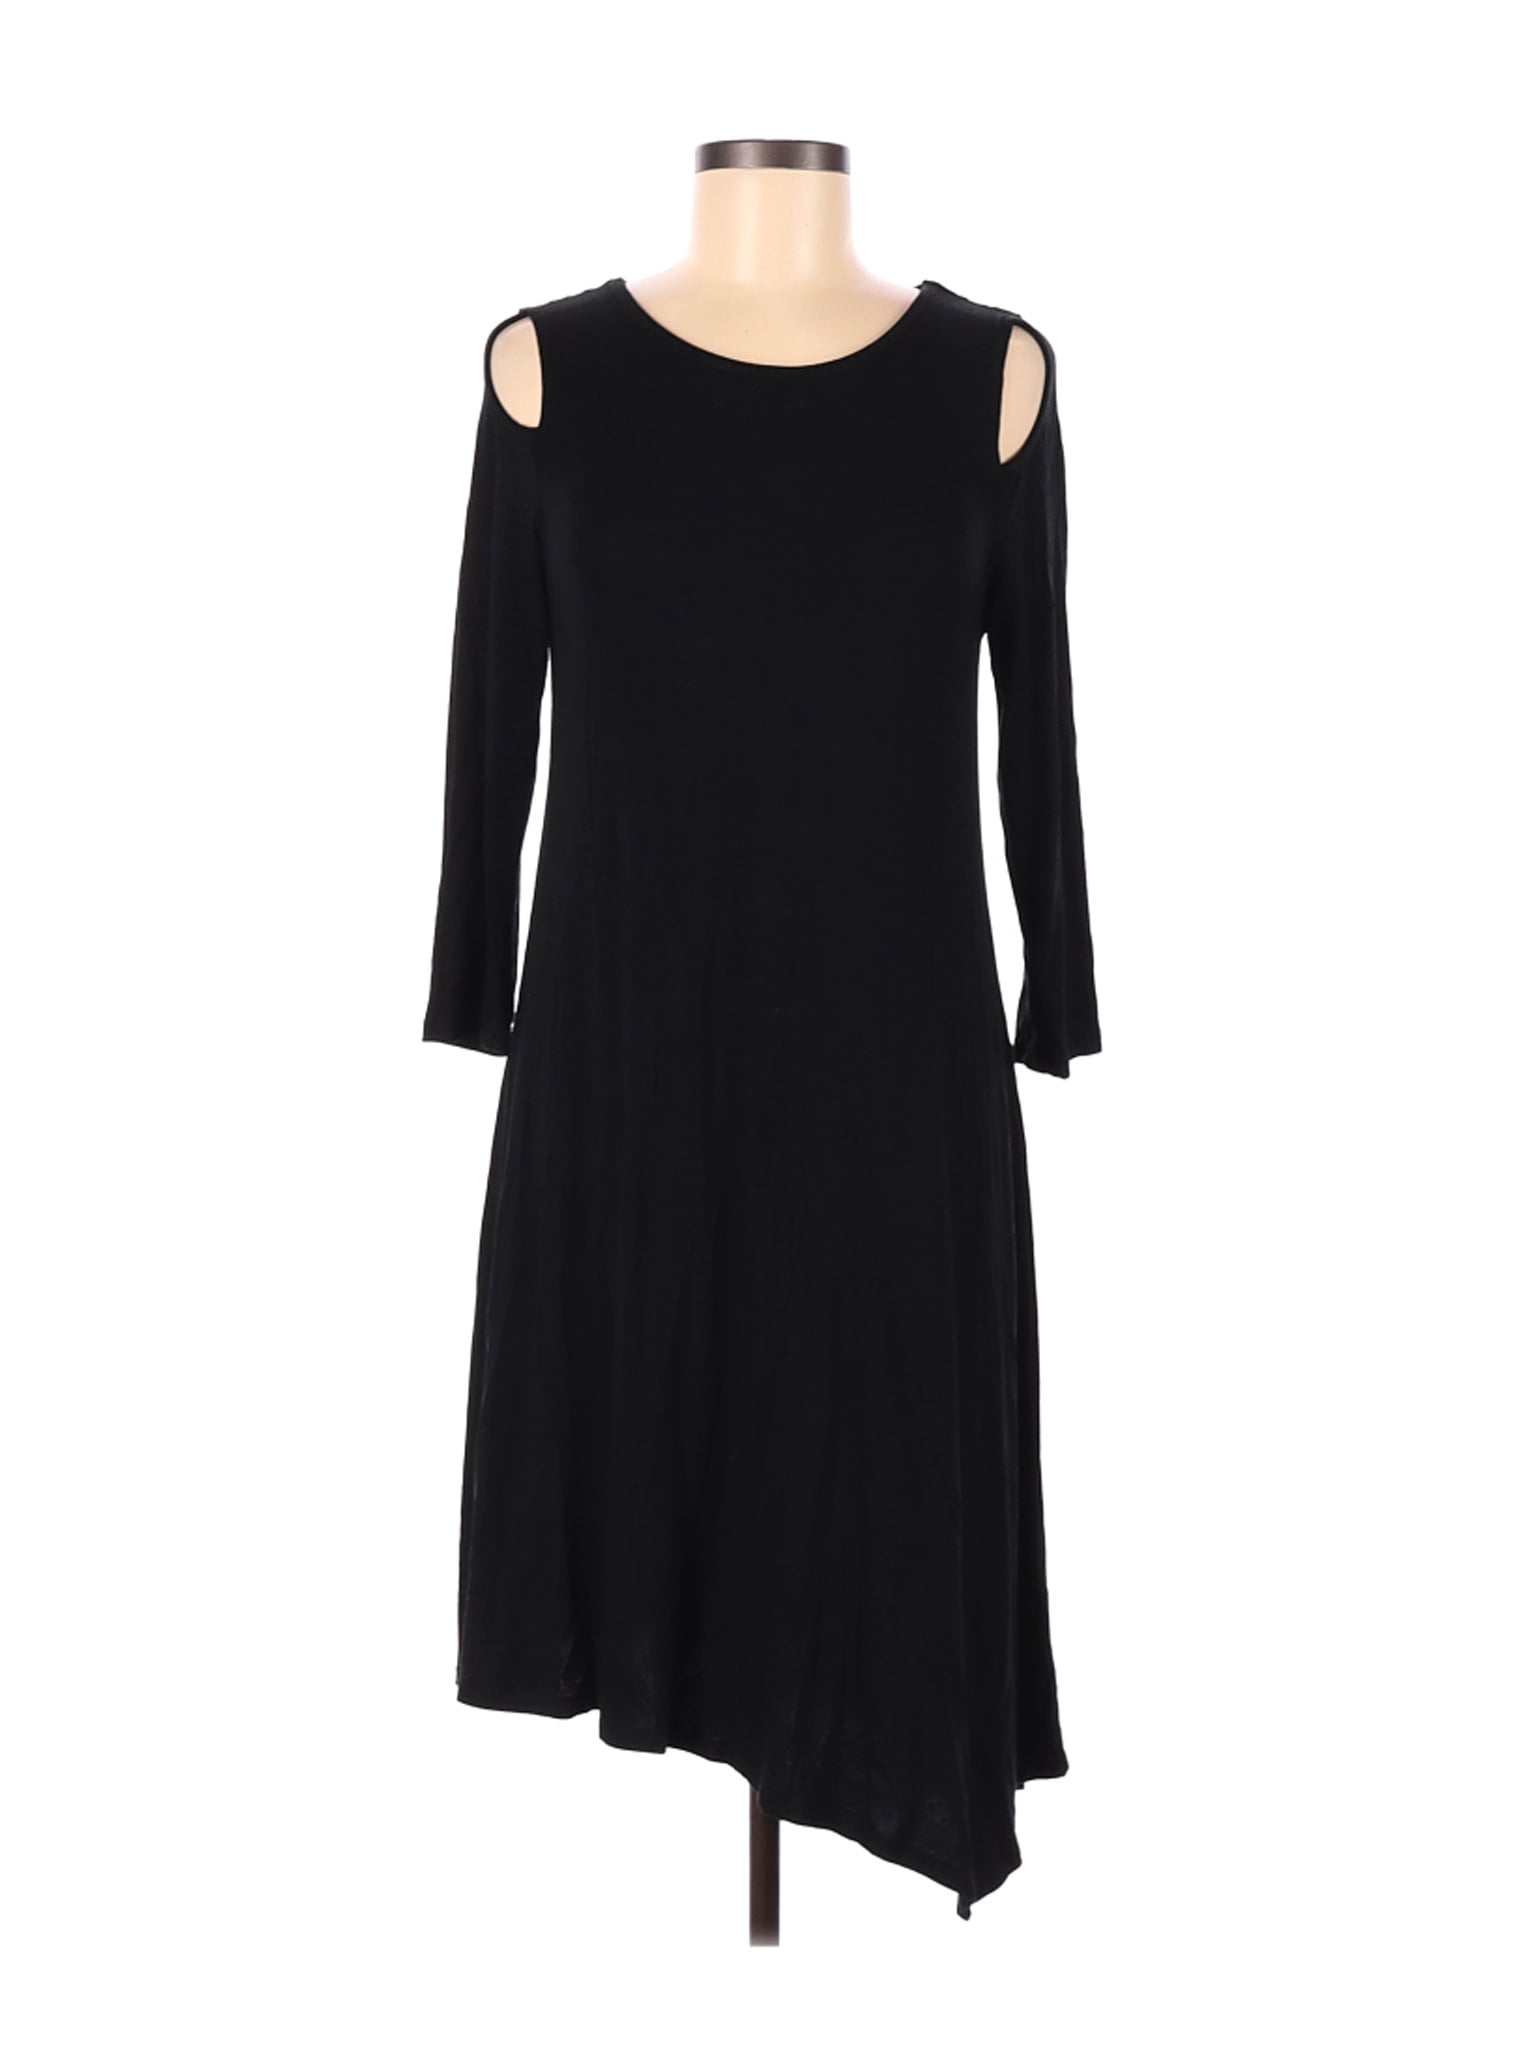 Alison Andrews - Pre-Owned Alison Andrews Women's Size S Casual Dress ...